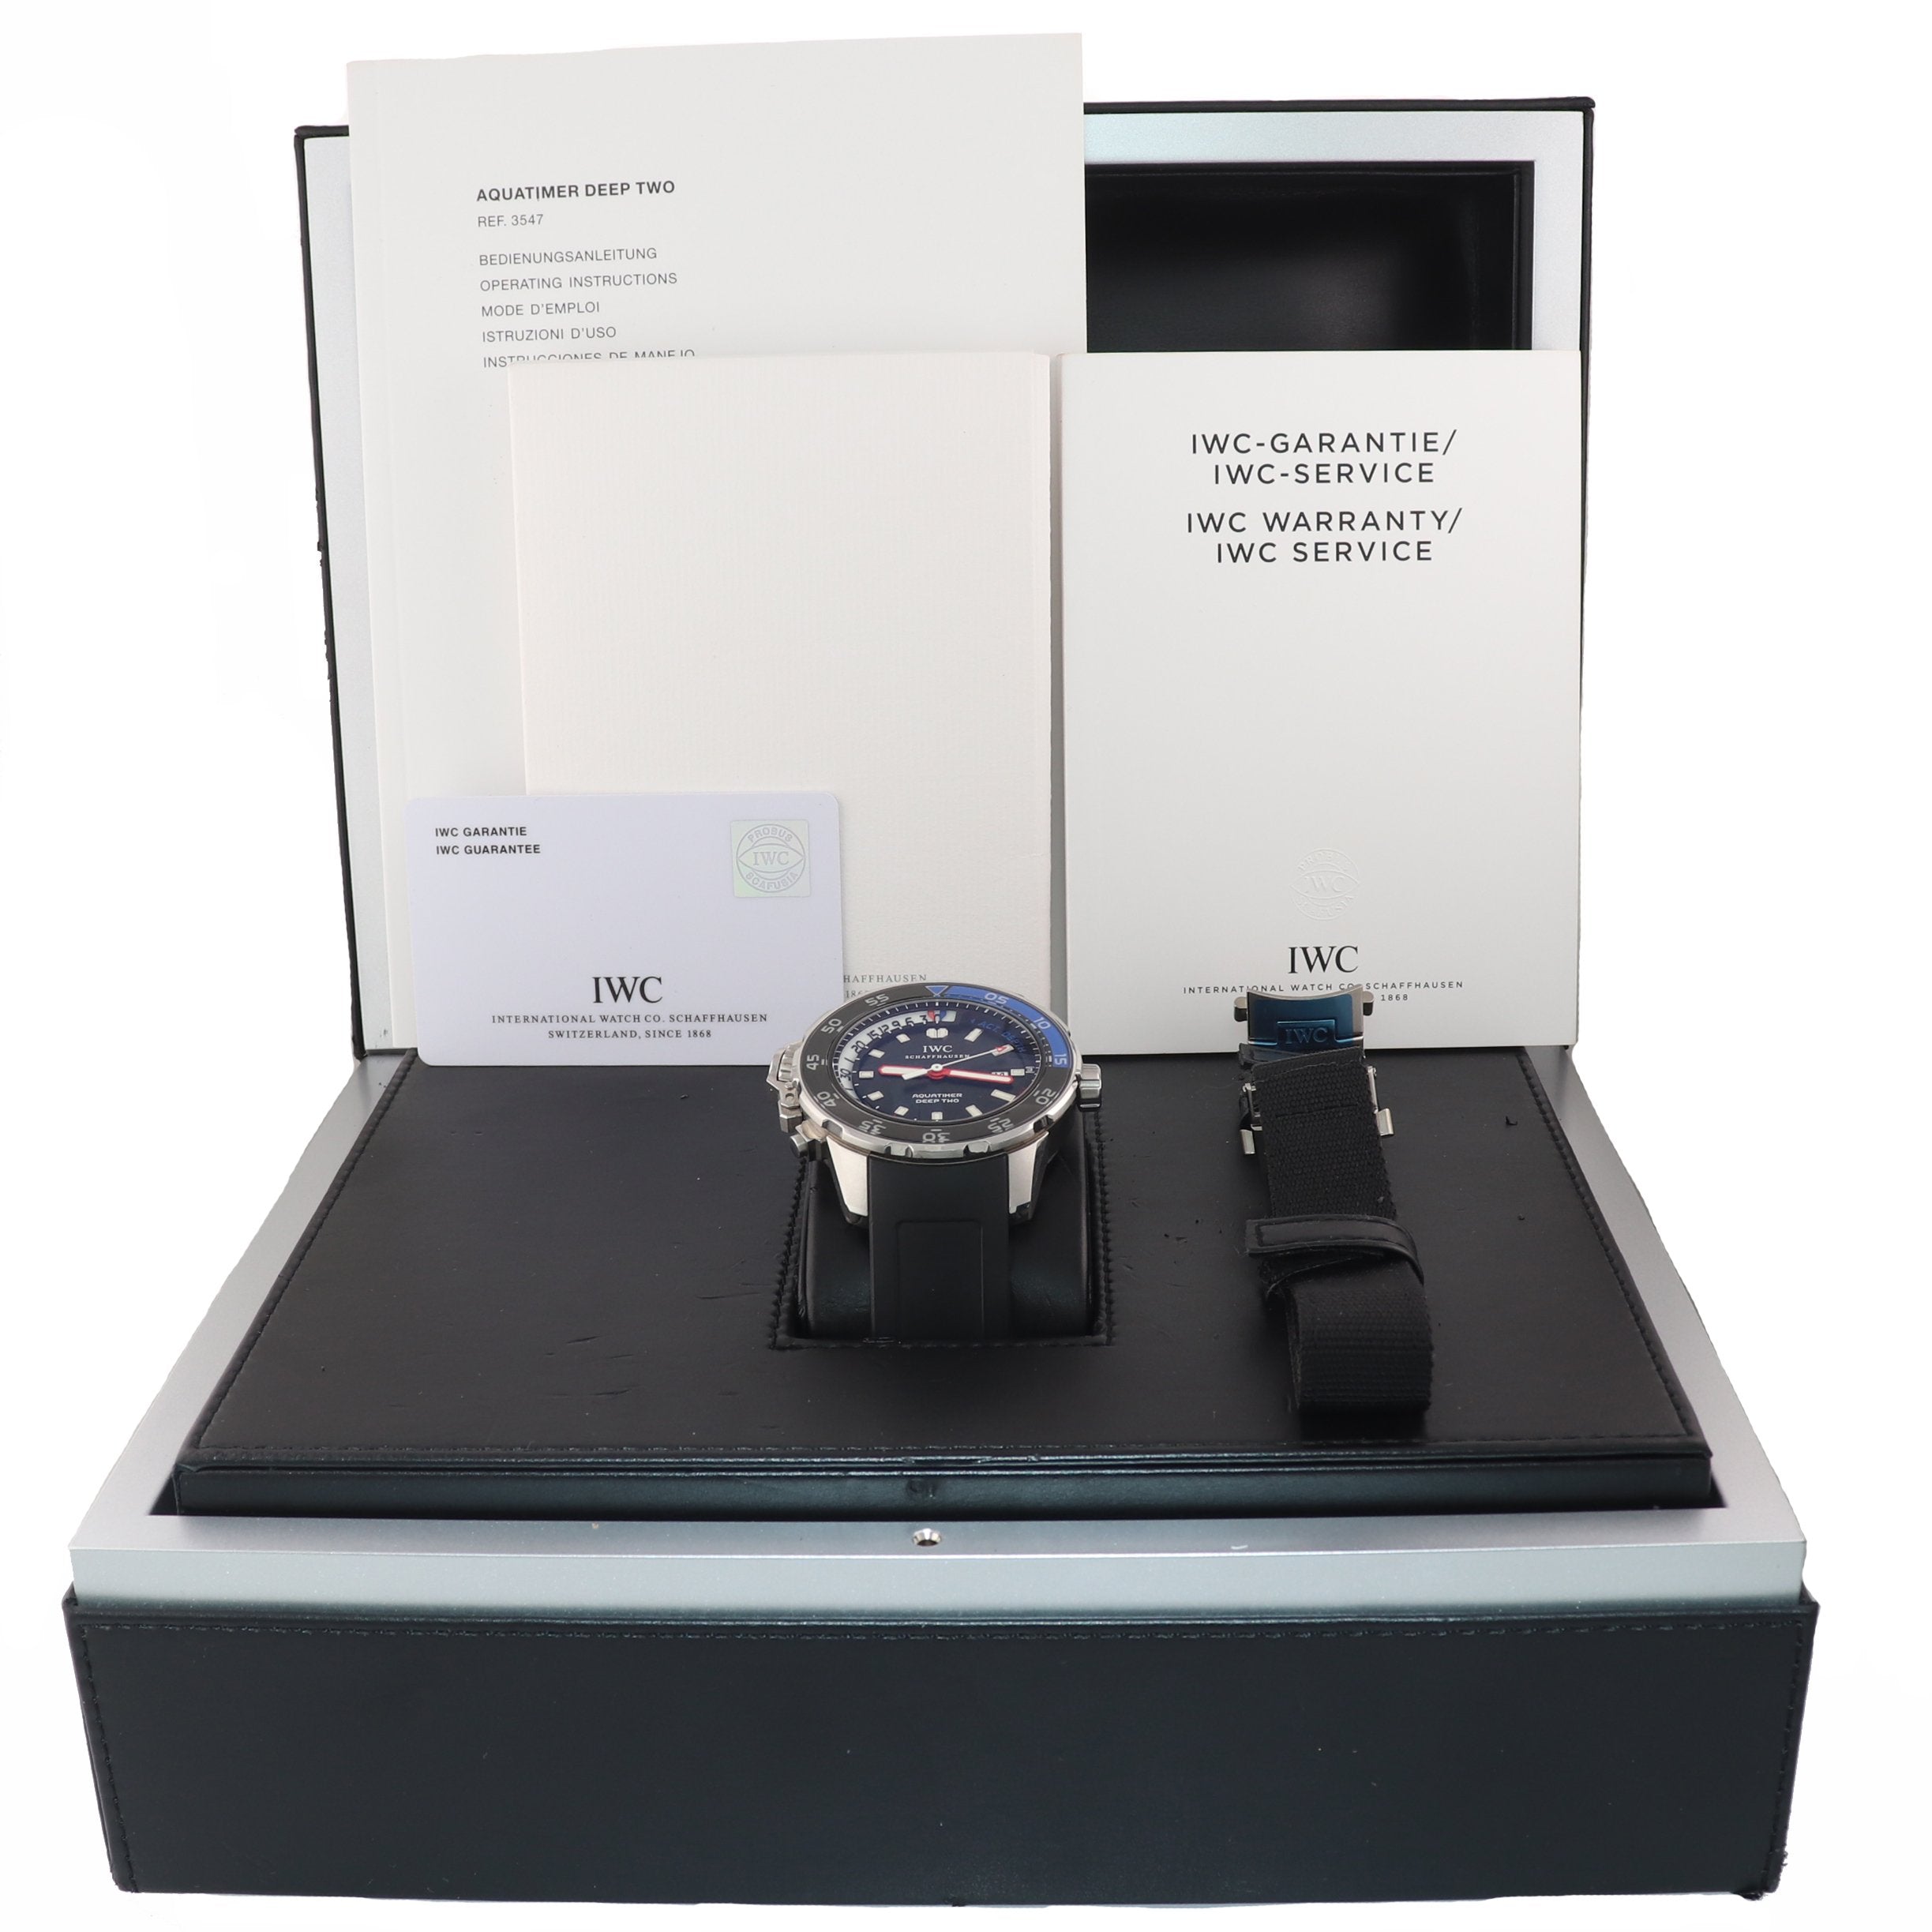 2014 PAPERS IWC Aquatimer Deep Two 3547-02 Steel Black Date 46mm Dive Watch